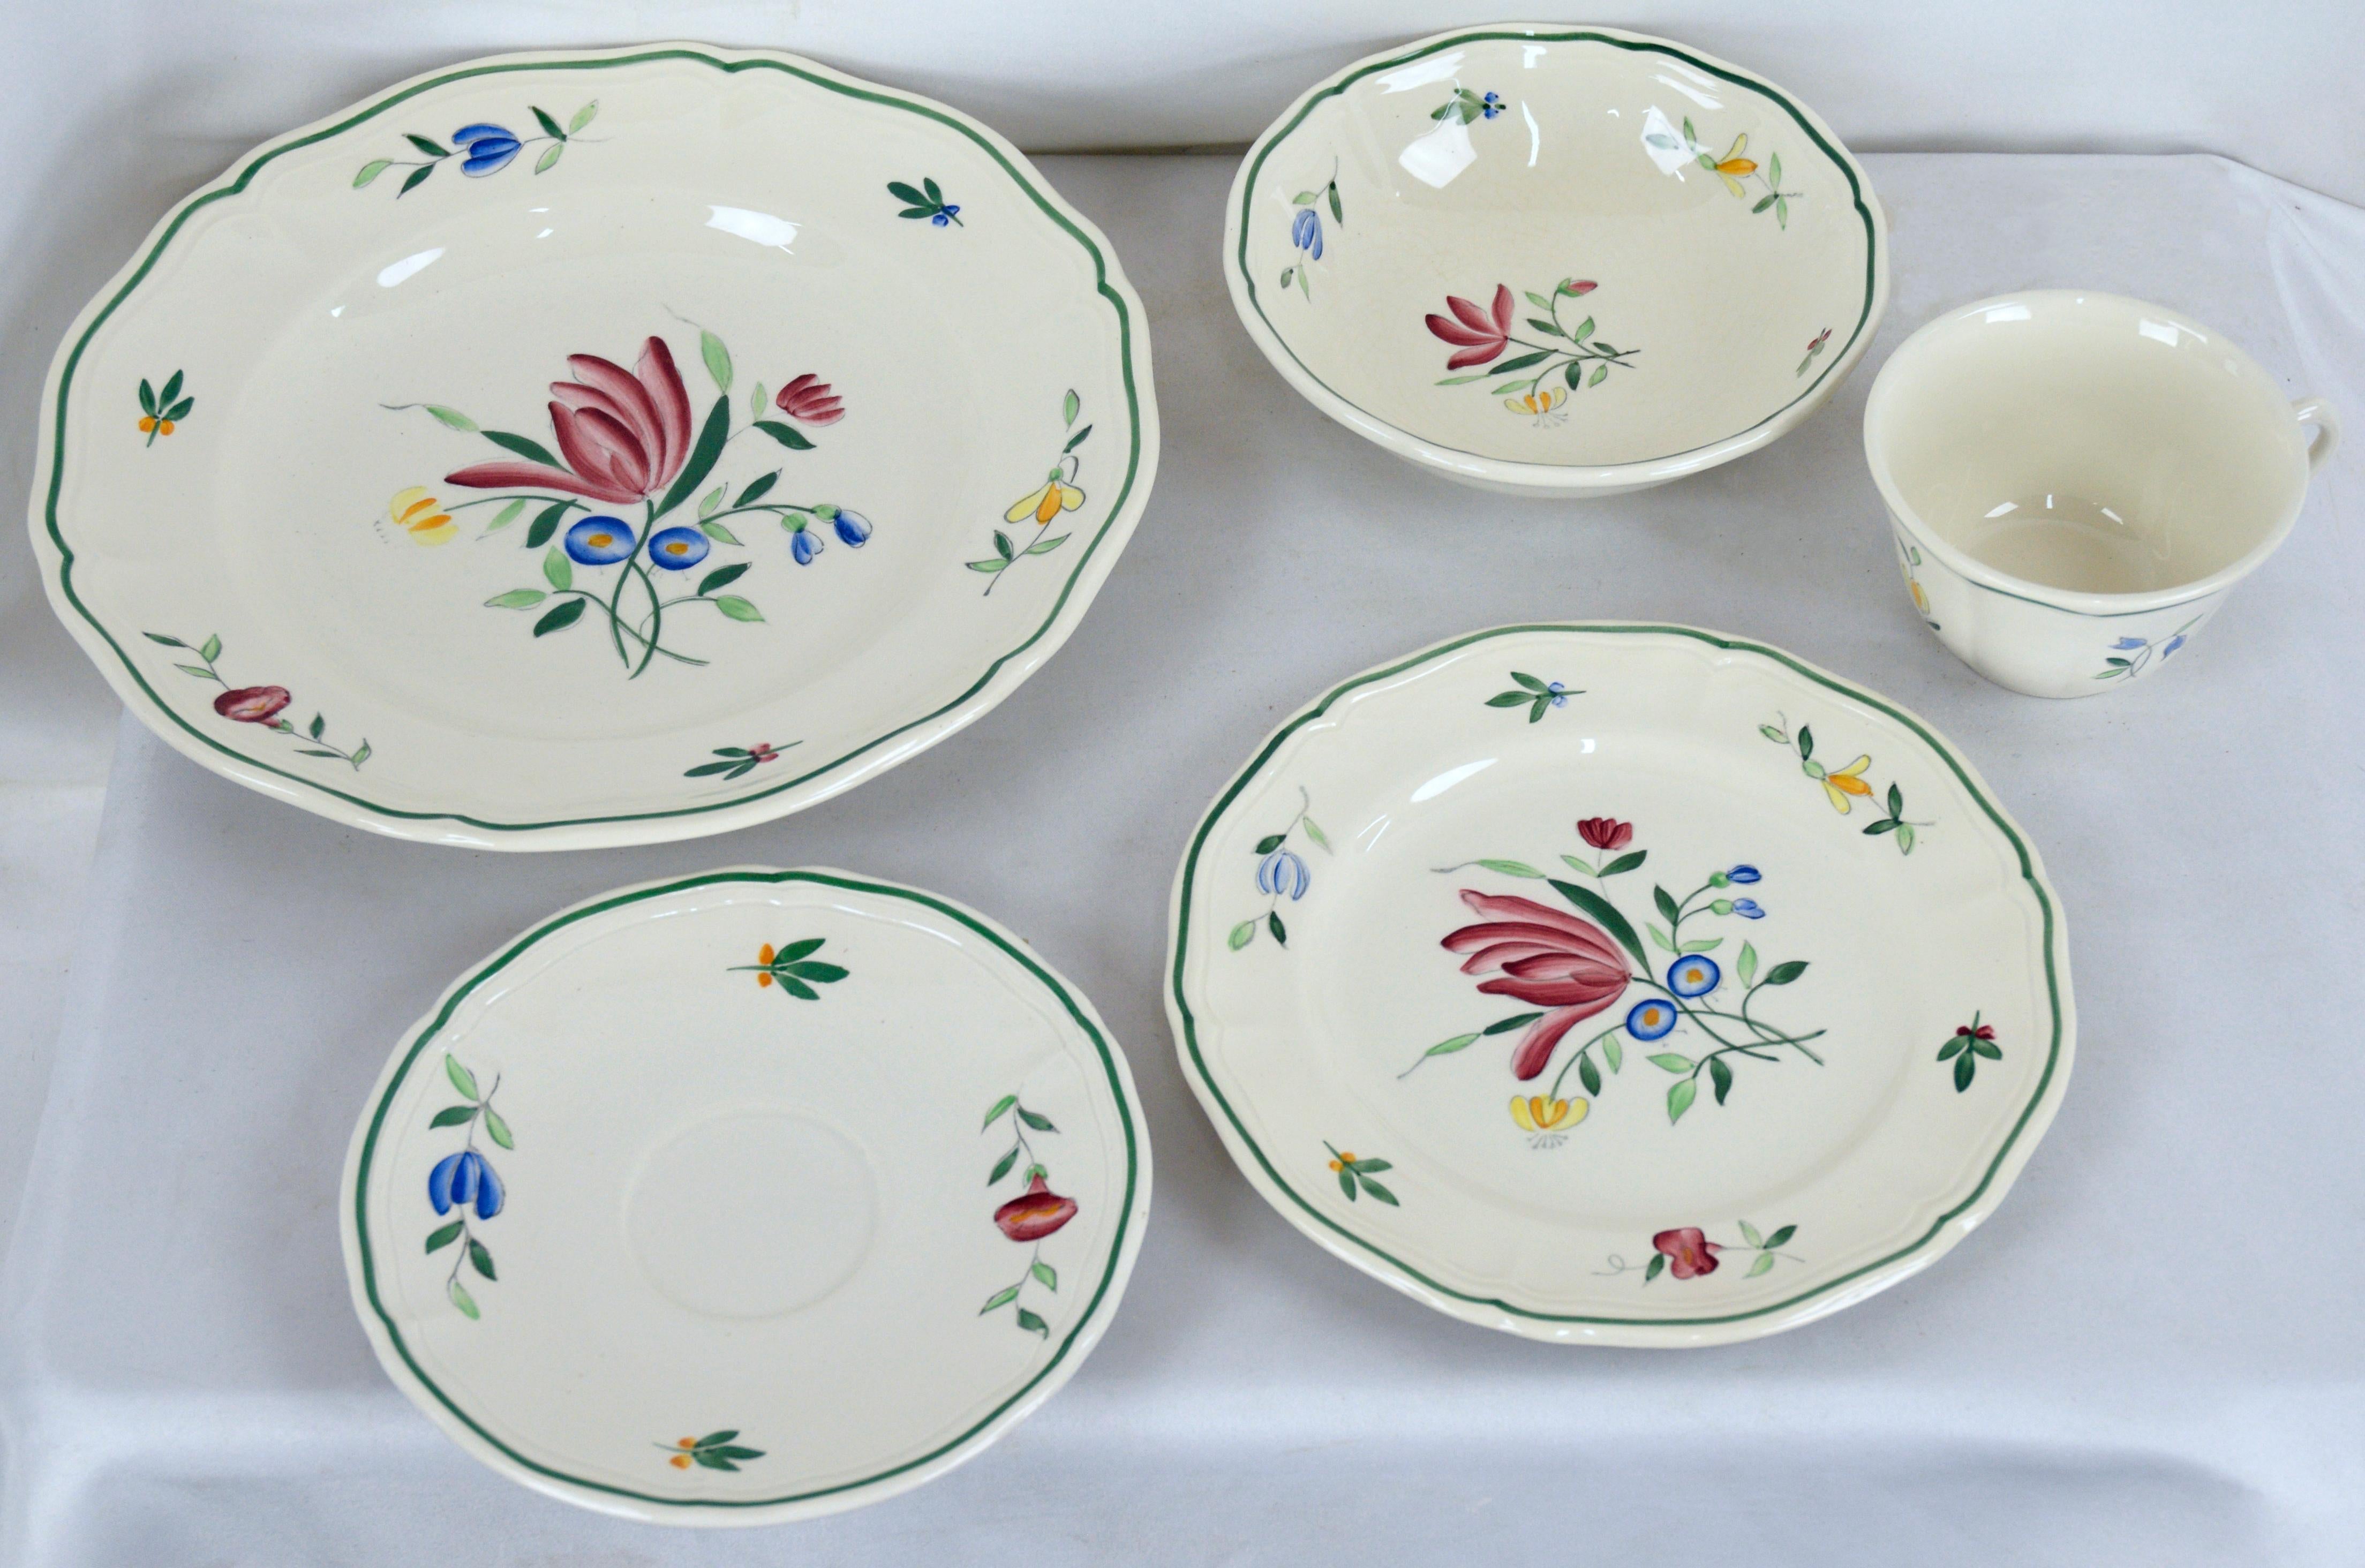 French Provincial Vintage 5-Piece Longchamp Tulip Place Setting, Set of 12, France